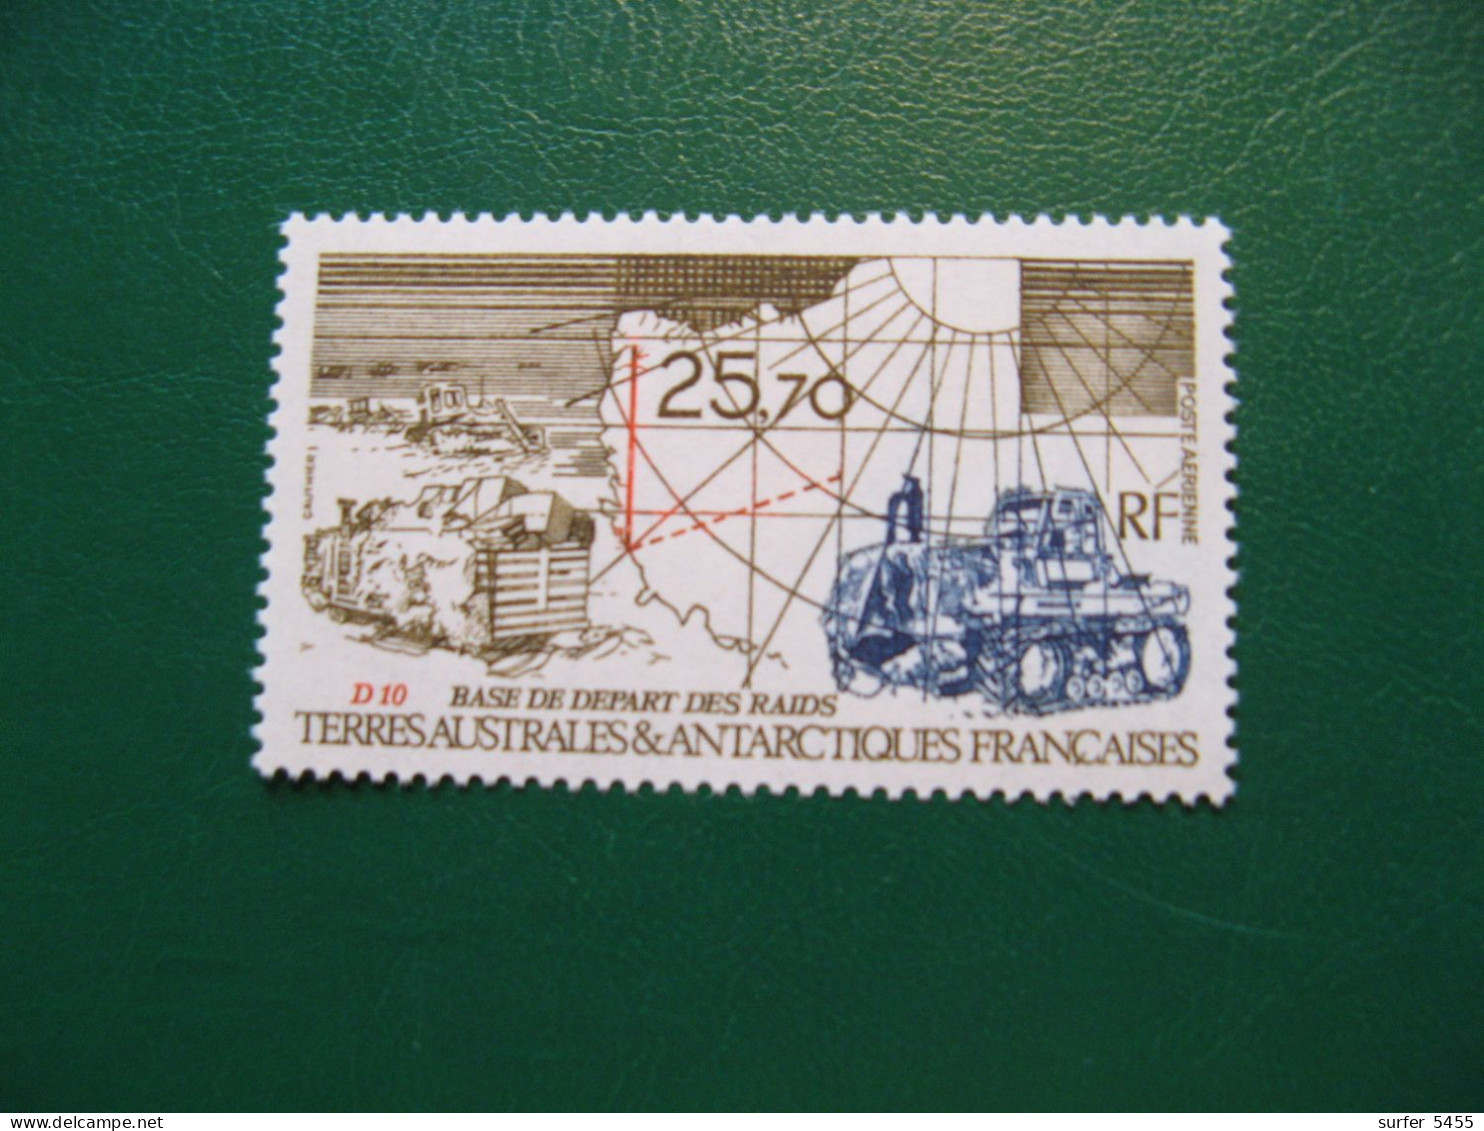 TAAF YVERT POSTE AERIENNE N° 127 - TIMBRE NEUF** LUXE - MNH - SERIE COMPLETE - FACIALE 3,91 EUROS - Nuovi